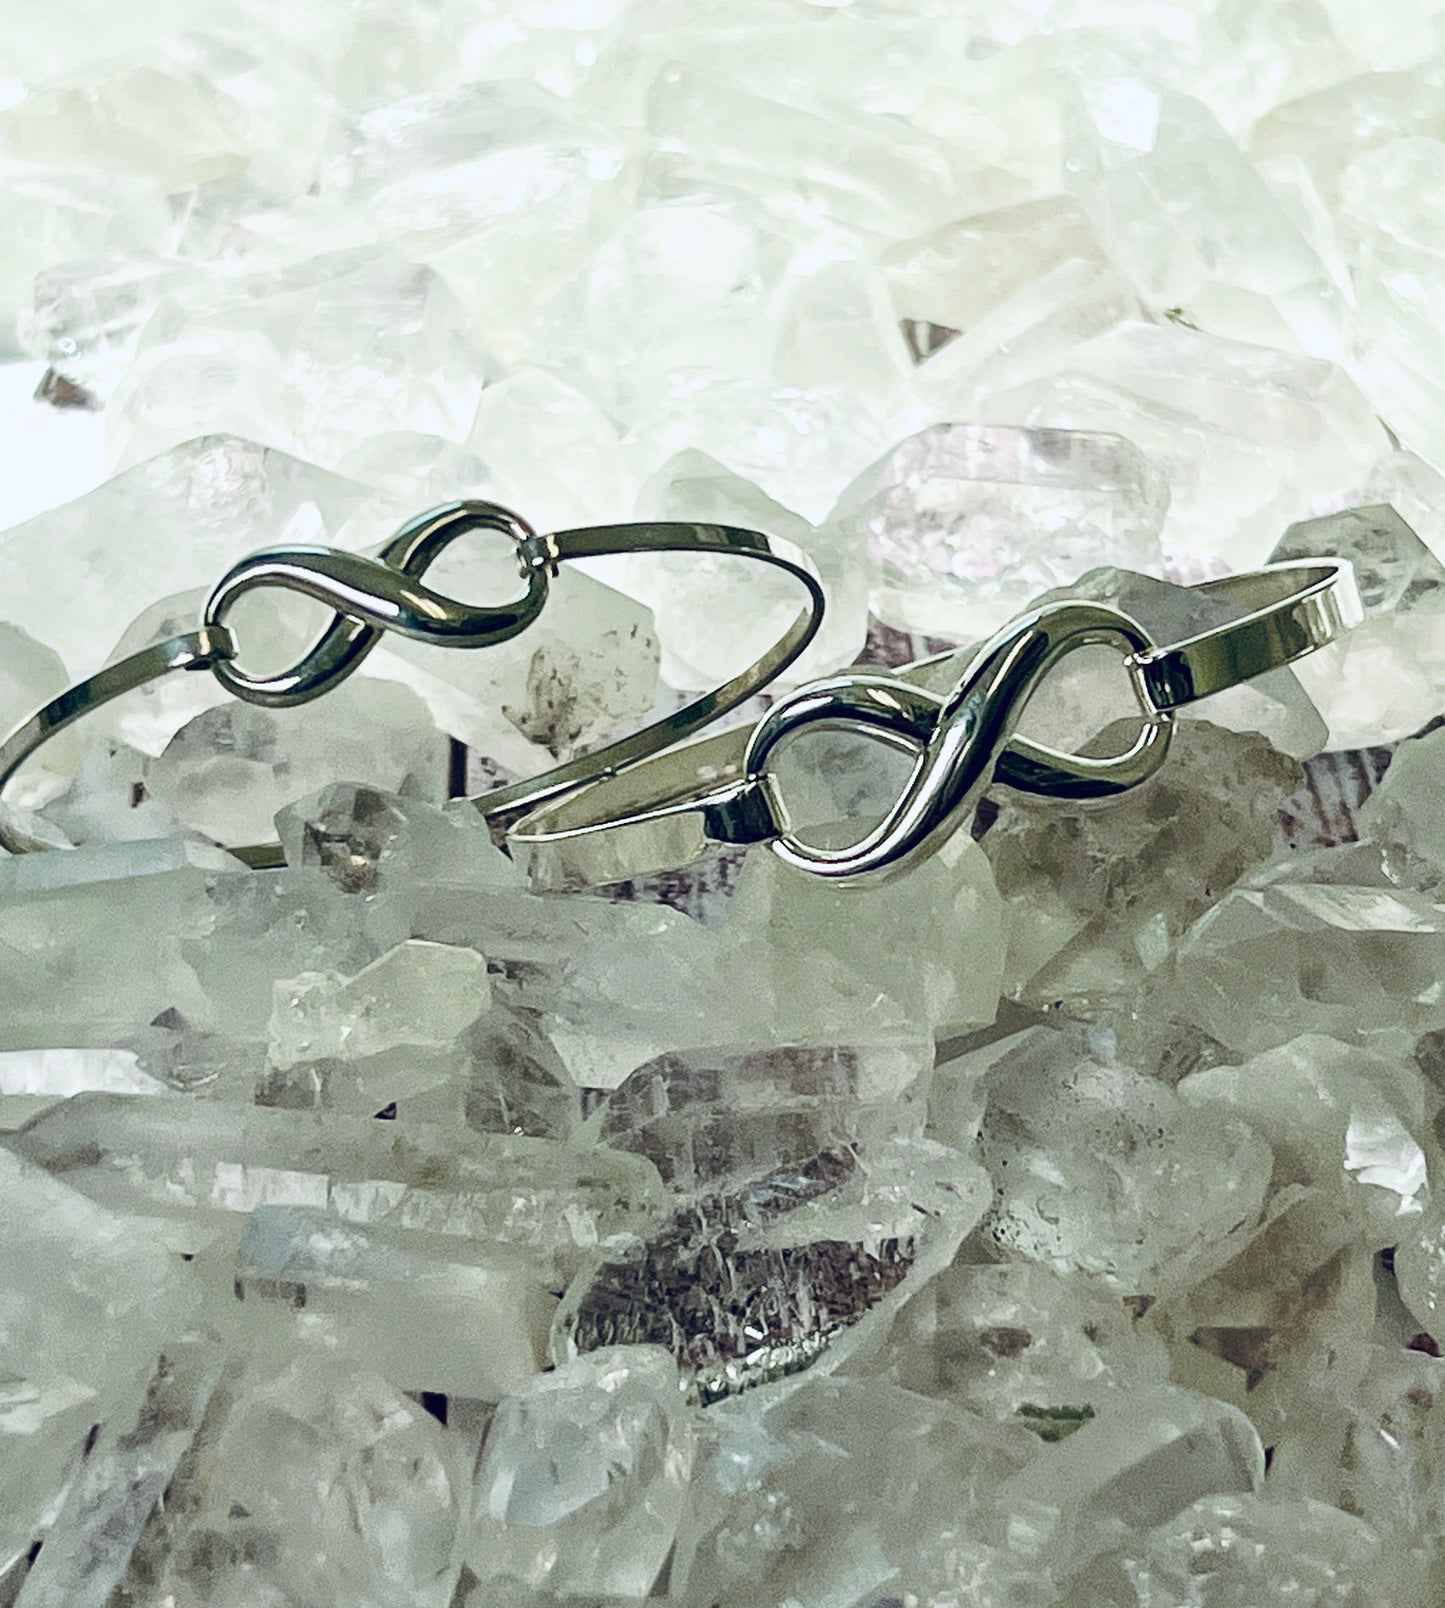 Two Super Silver Dainty Infinity Sign Bracelets with a latch clasp, atop a pile of crystals.